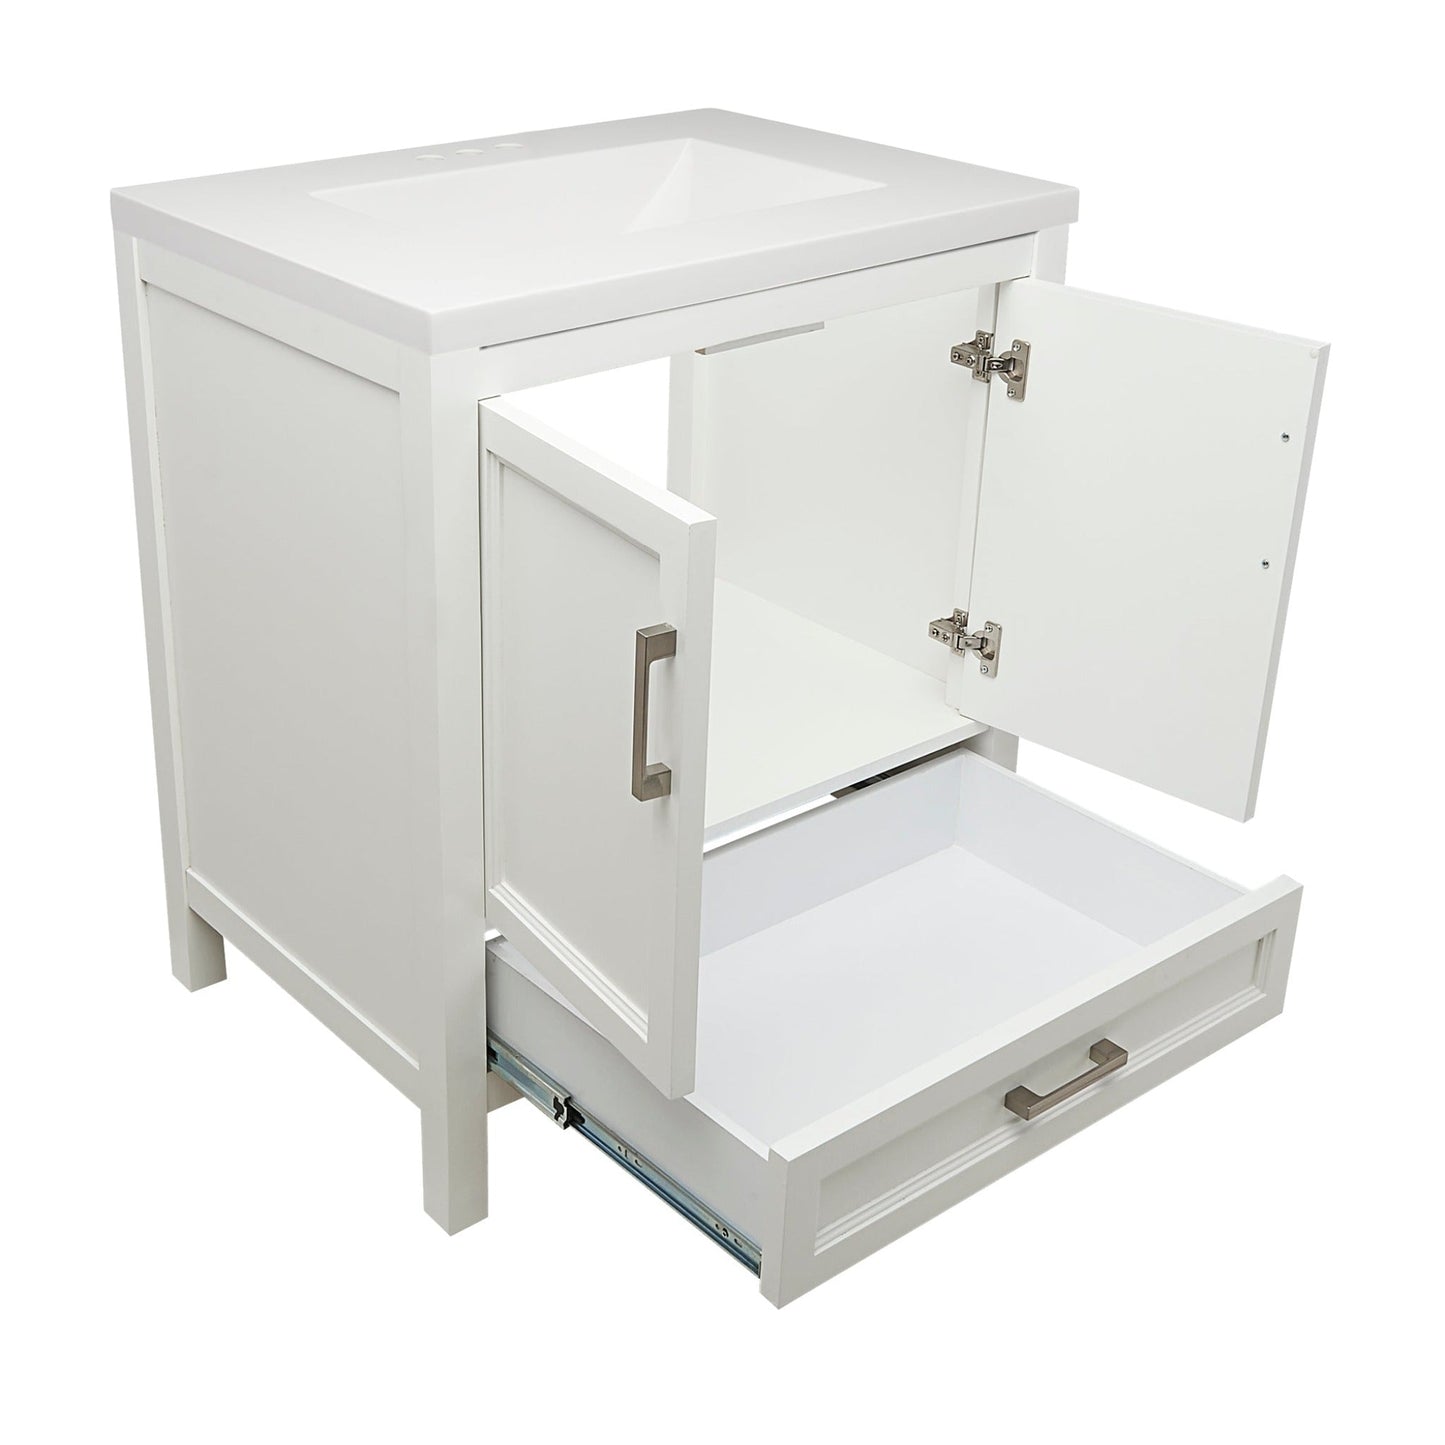 Ella’s Bubbles Nevado 31" White Bathroom Vanity With White Cultured Marble Top and Sink